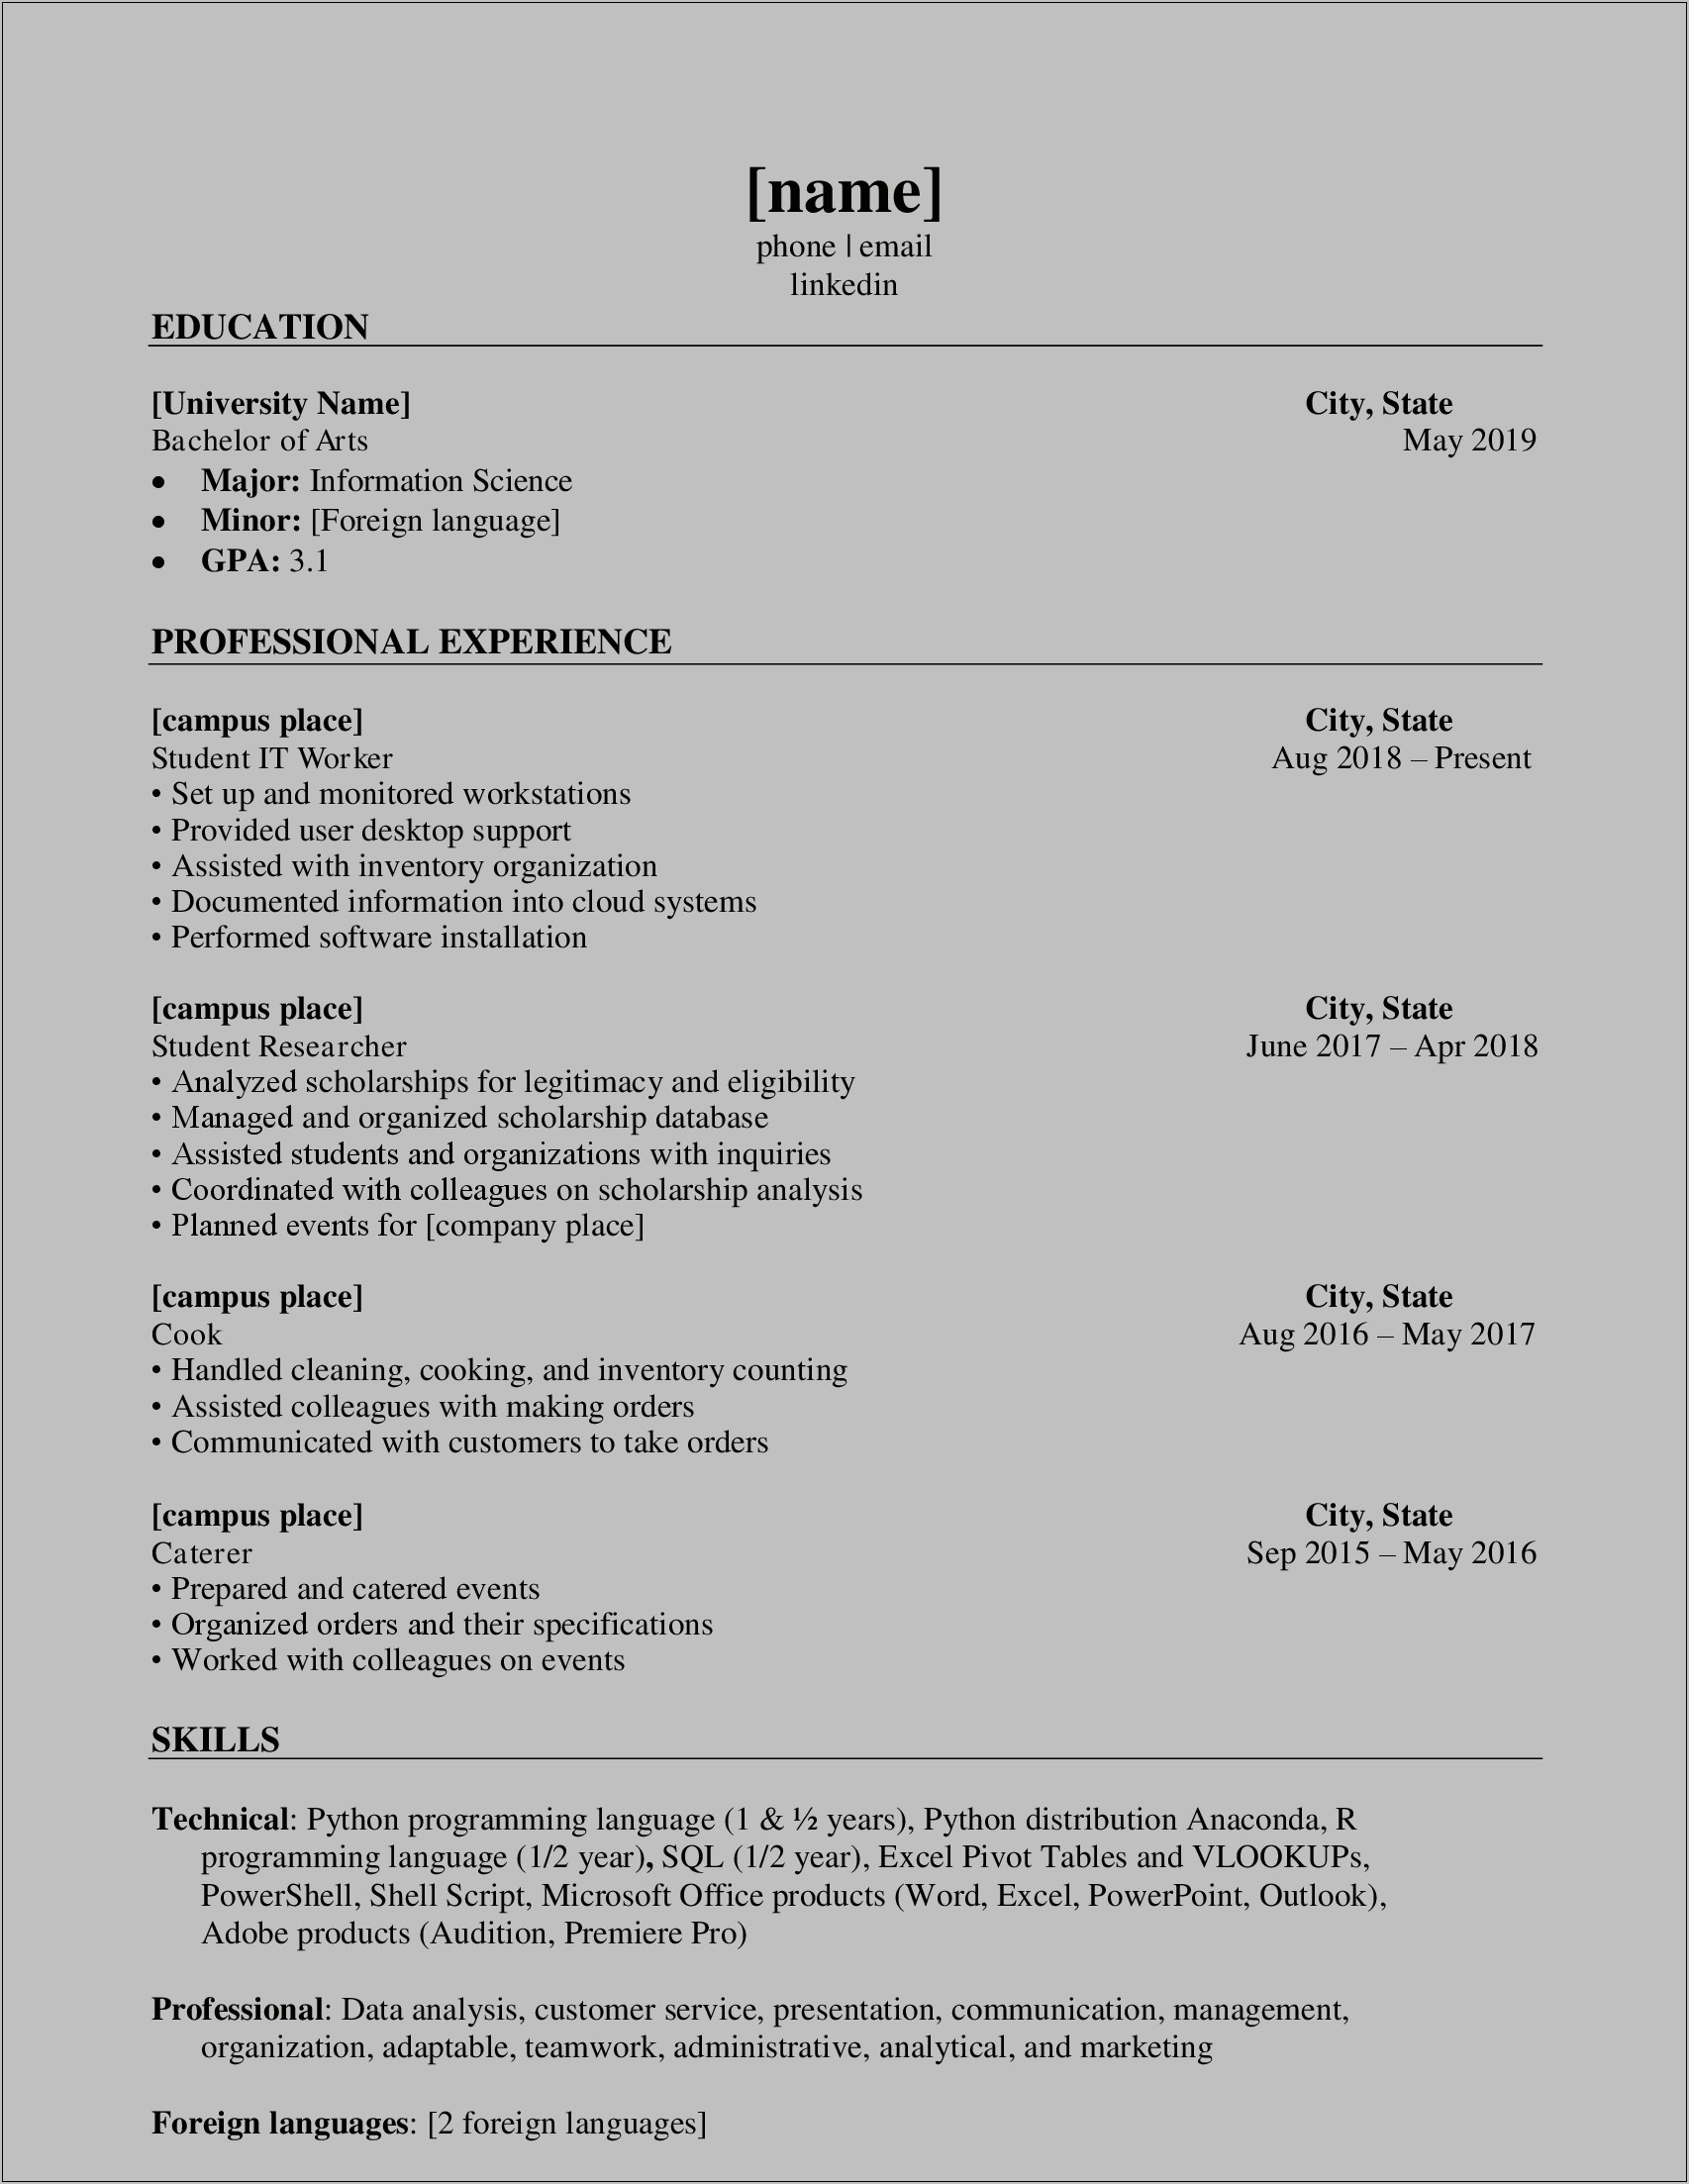 Resume Templates For Data Analyst Jobs